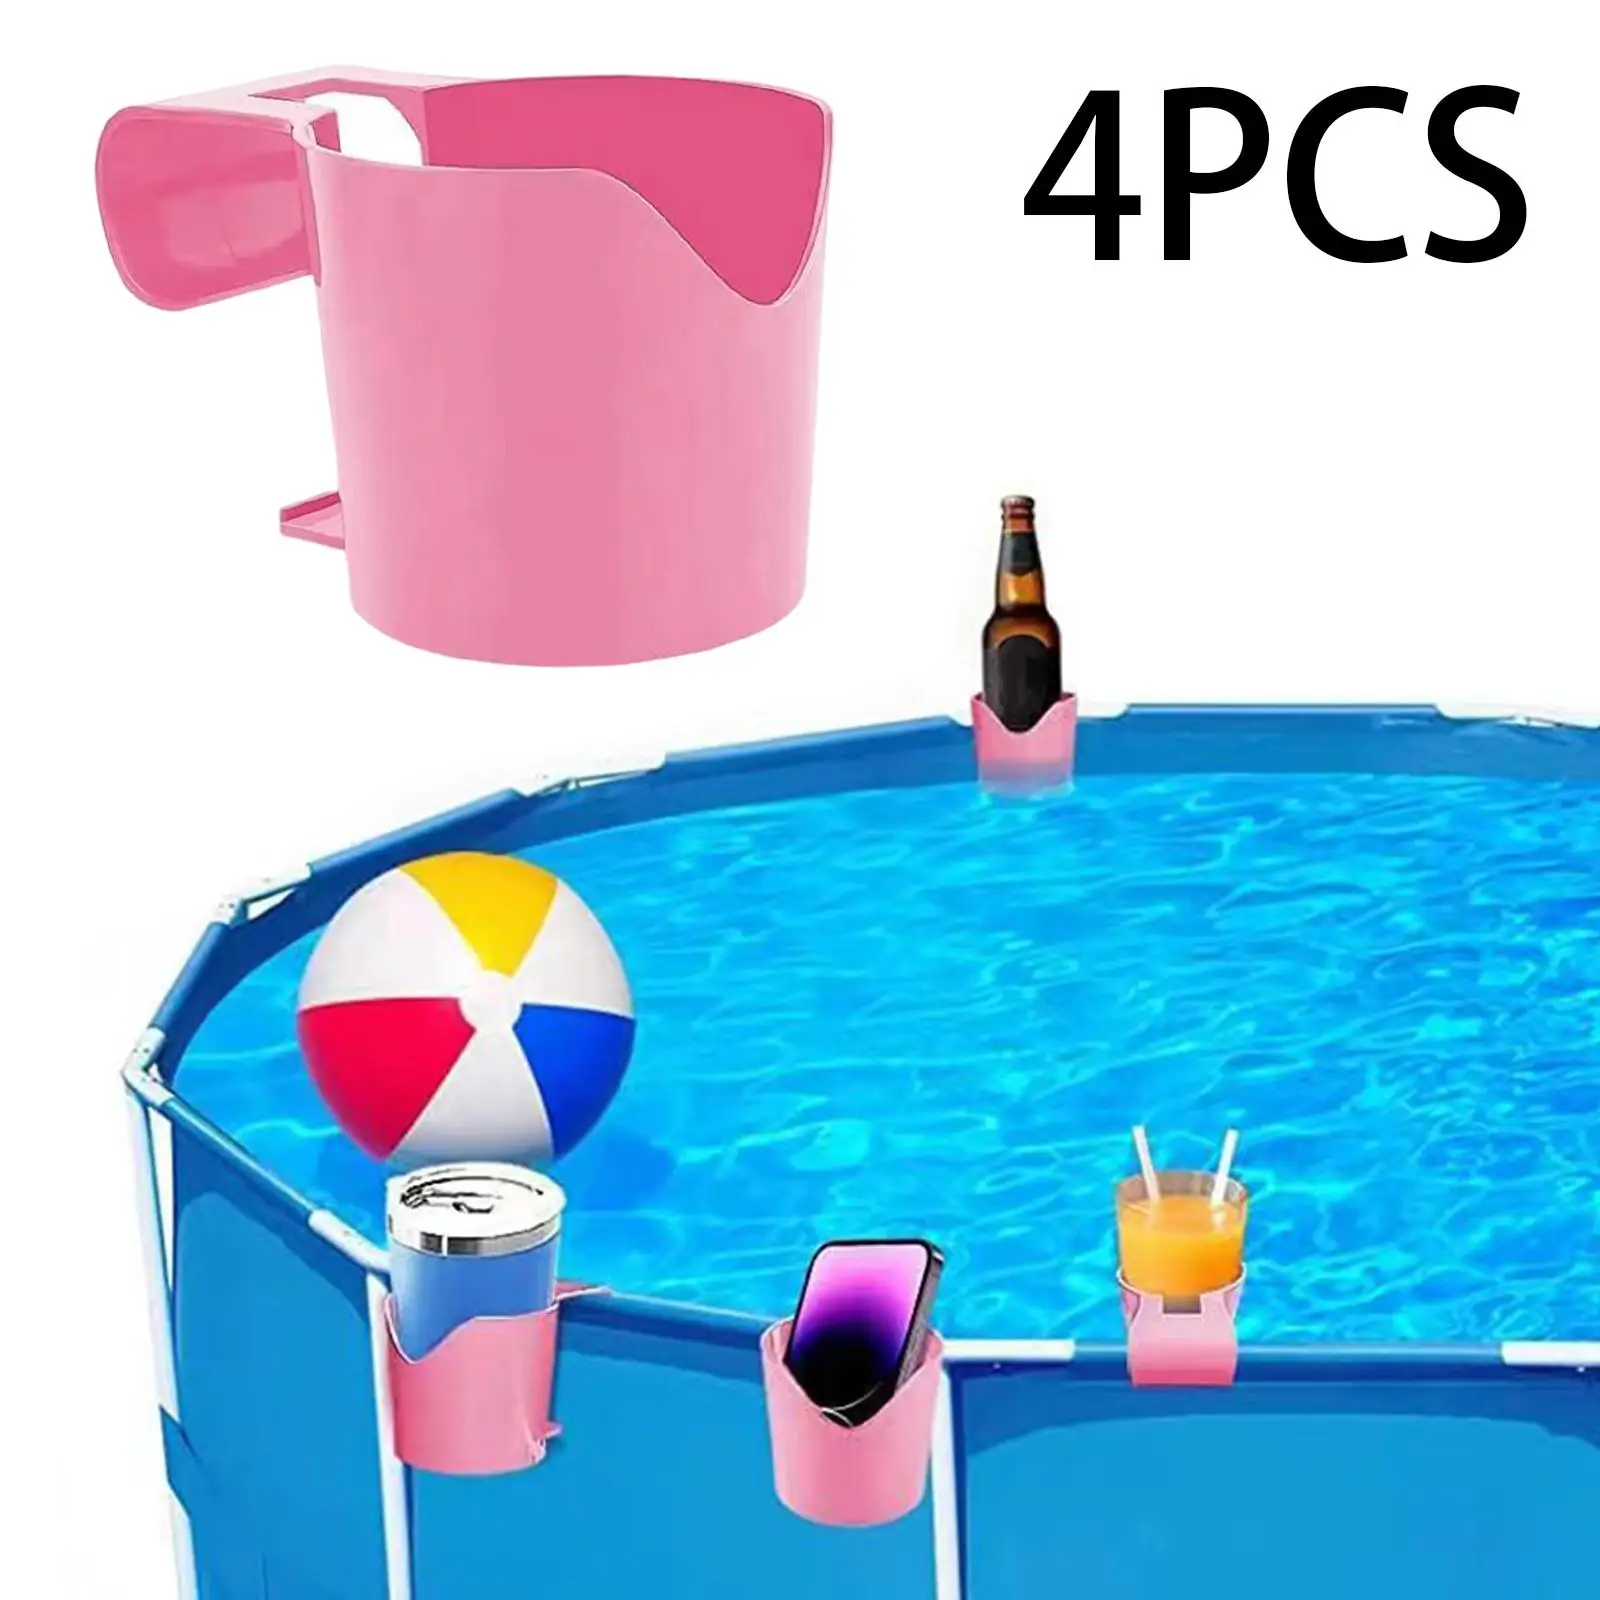 4Pcs Water Cup Hanging Holders Outdoor Container Hook Poolside Cup Holders for above Ground Pools Swimming Pool Drink Holders